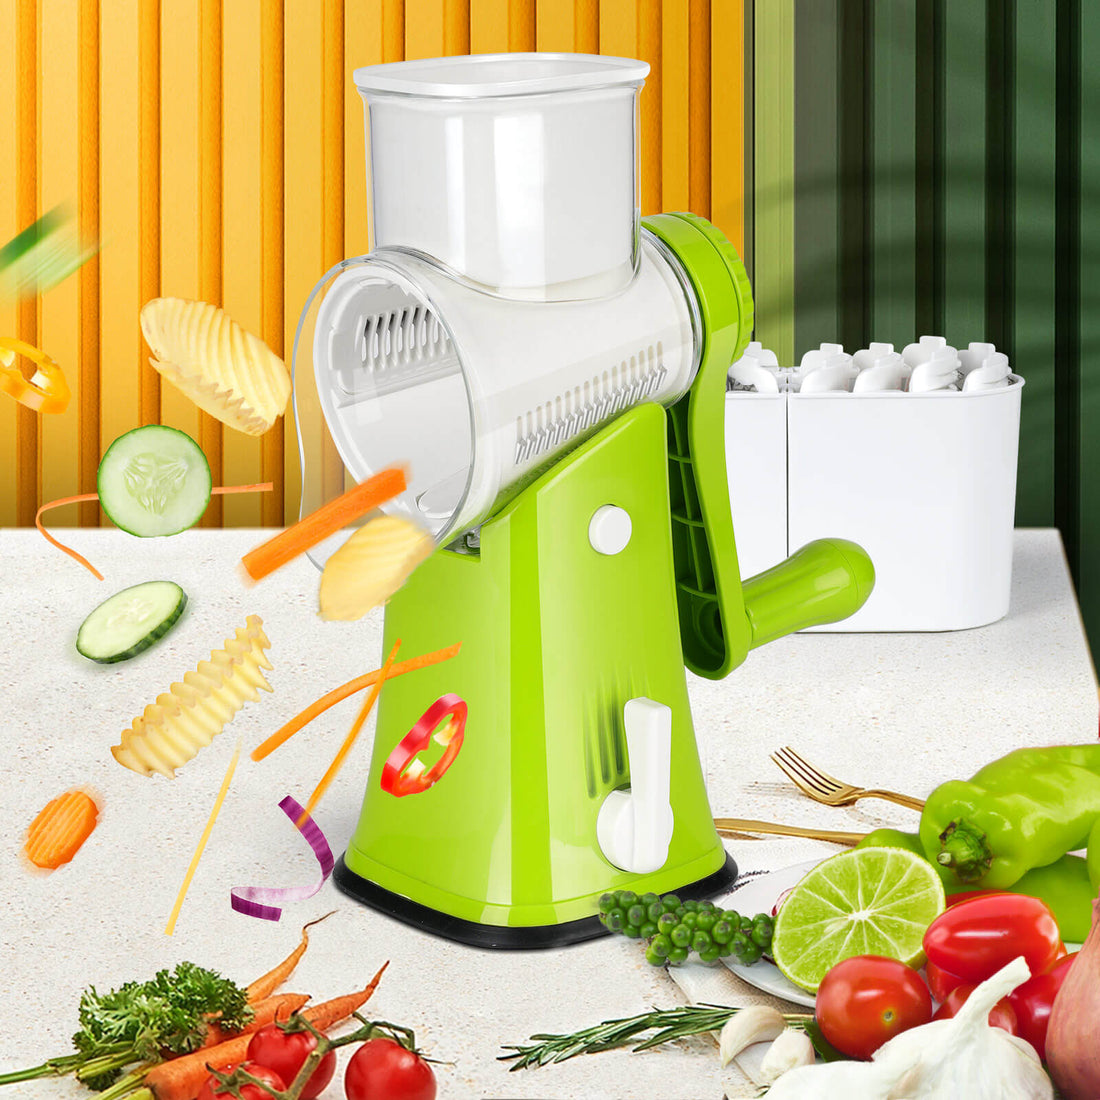 Thsue Home Kitchen Cheese Grater, Rotary Cheese Grater, Handheld